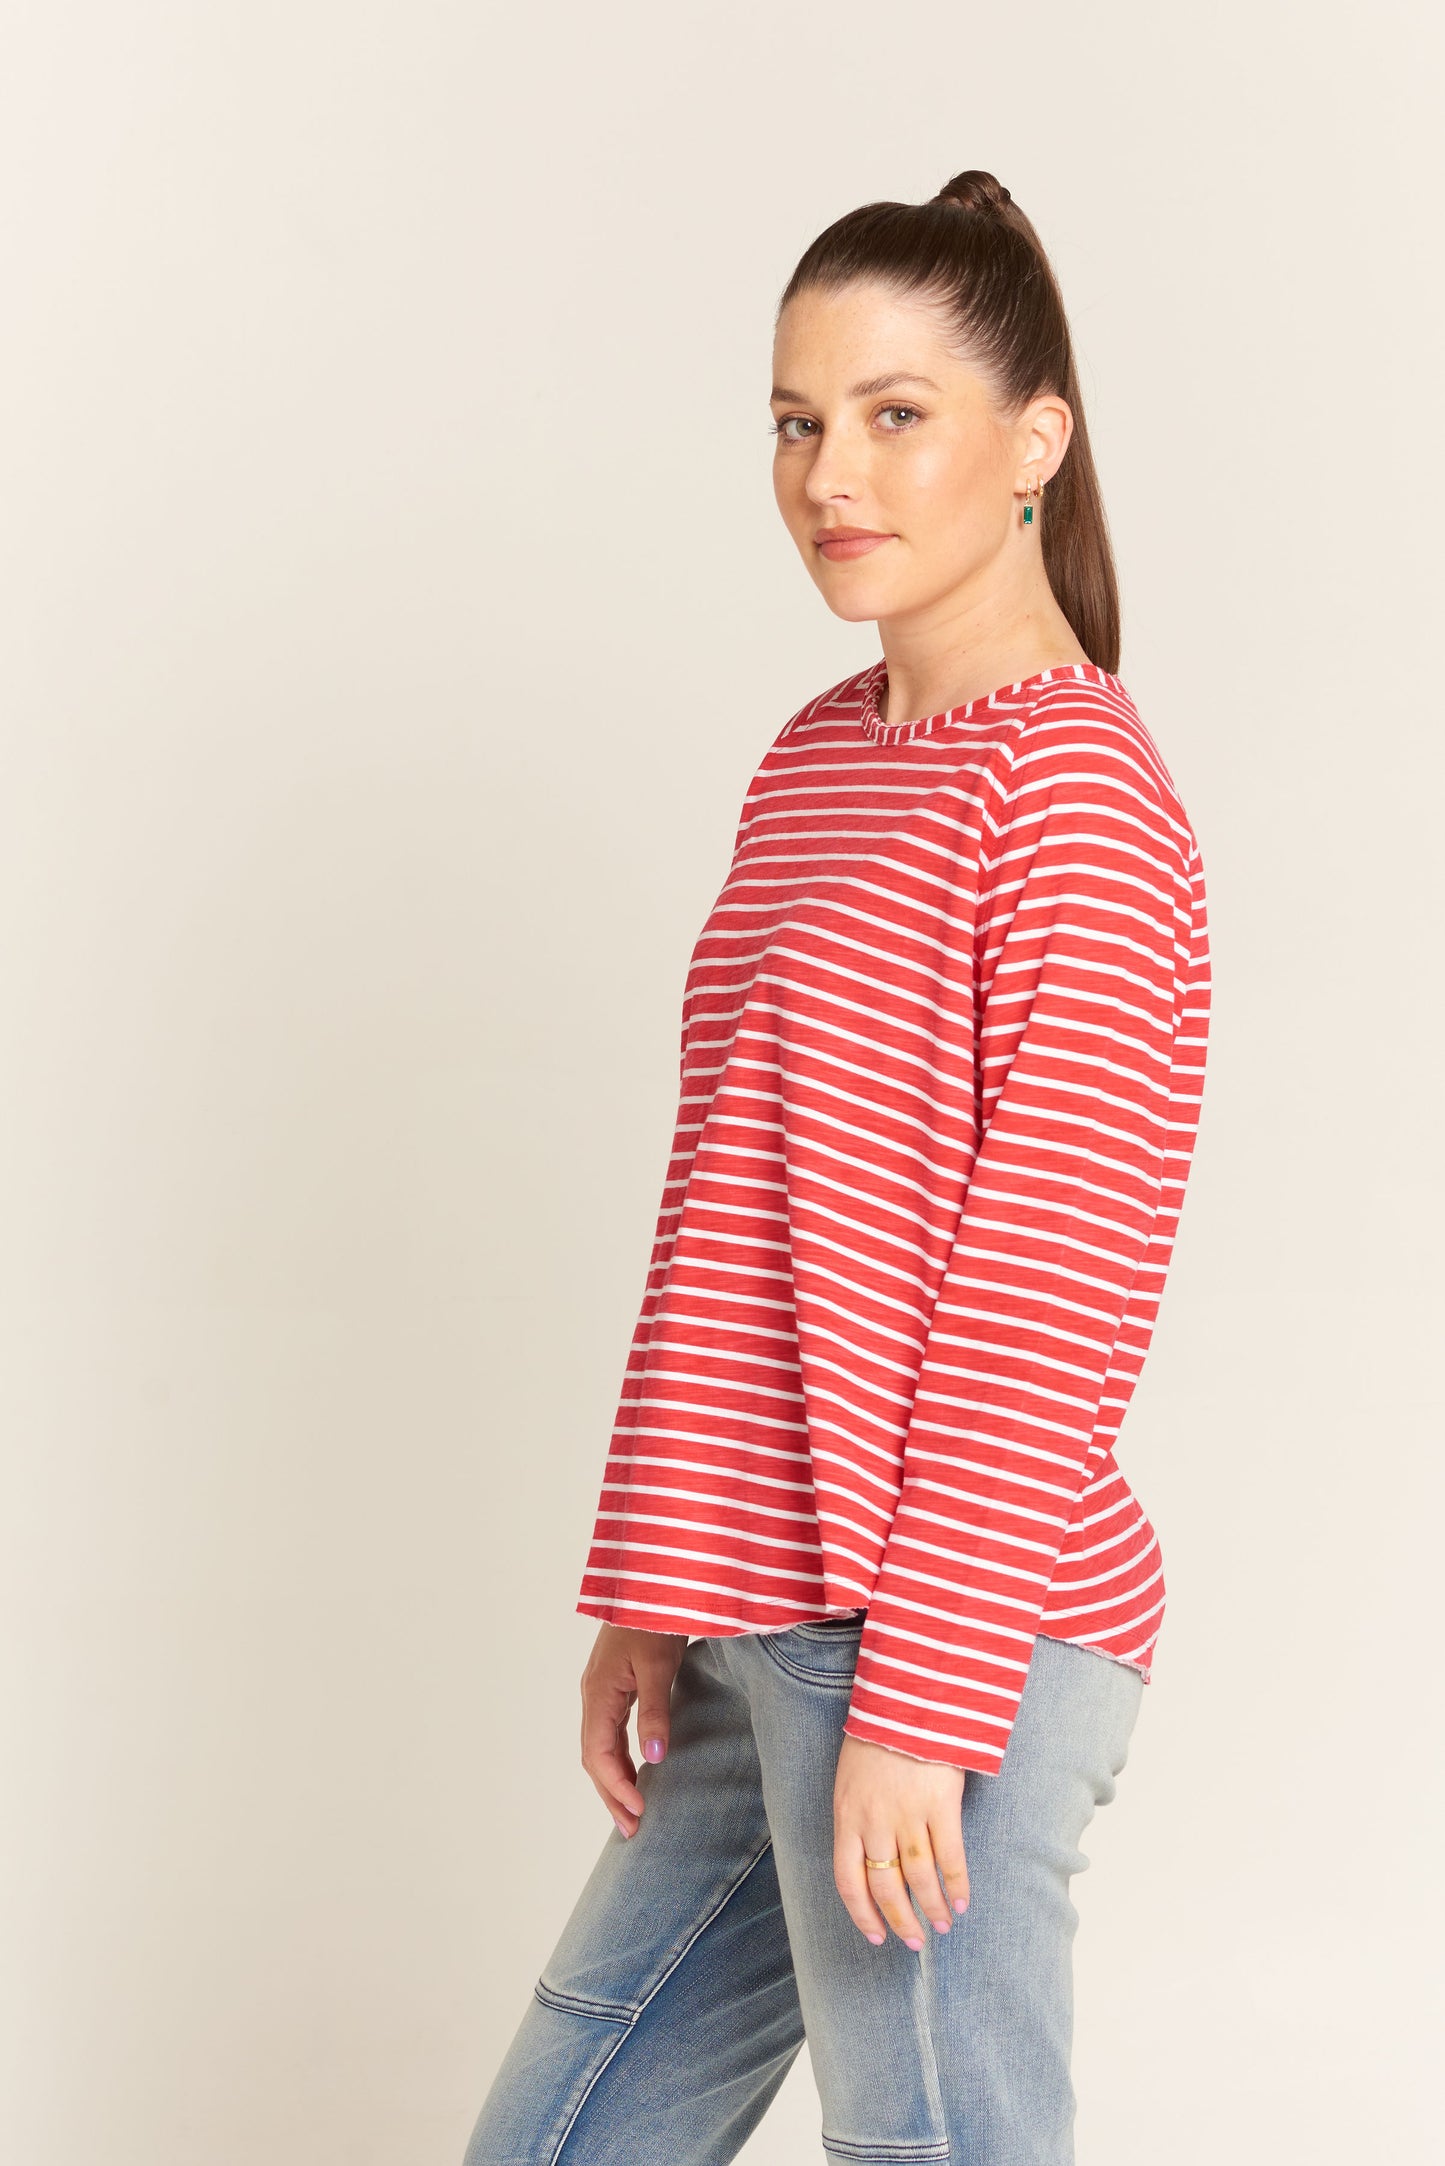 Cloth Paper Scissors Long Sleeve Wide Stripe Print White/Red | CPS1357-12